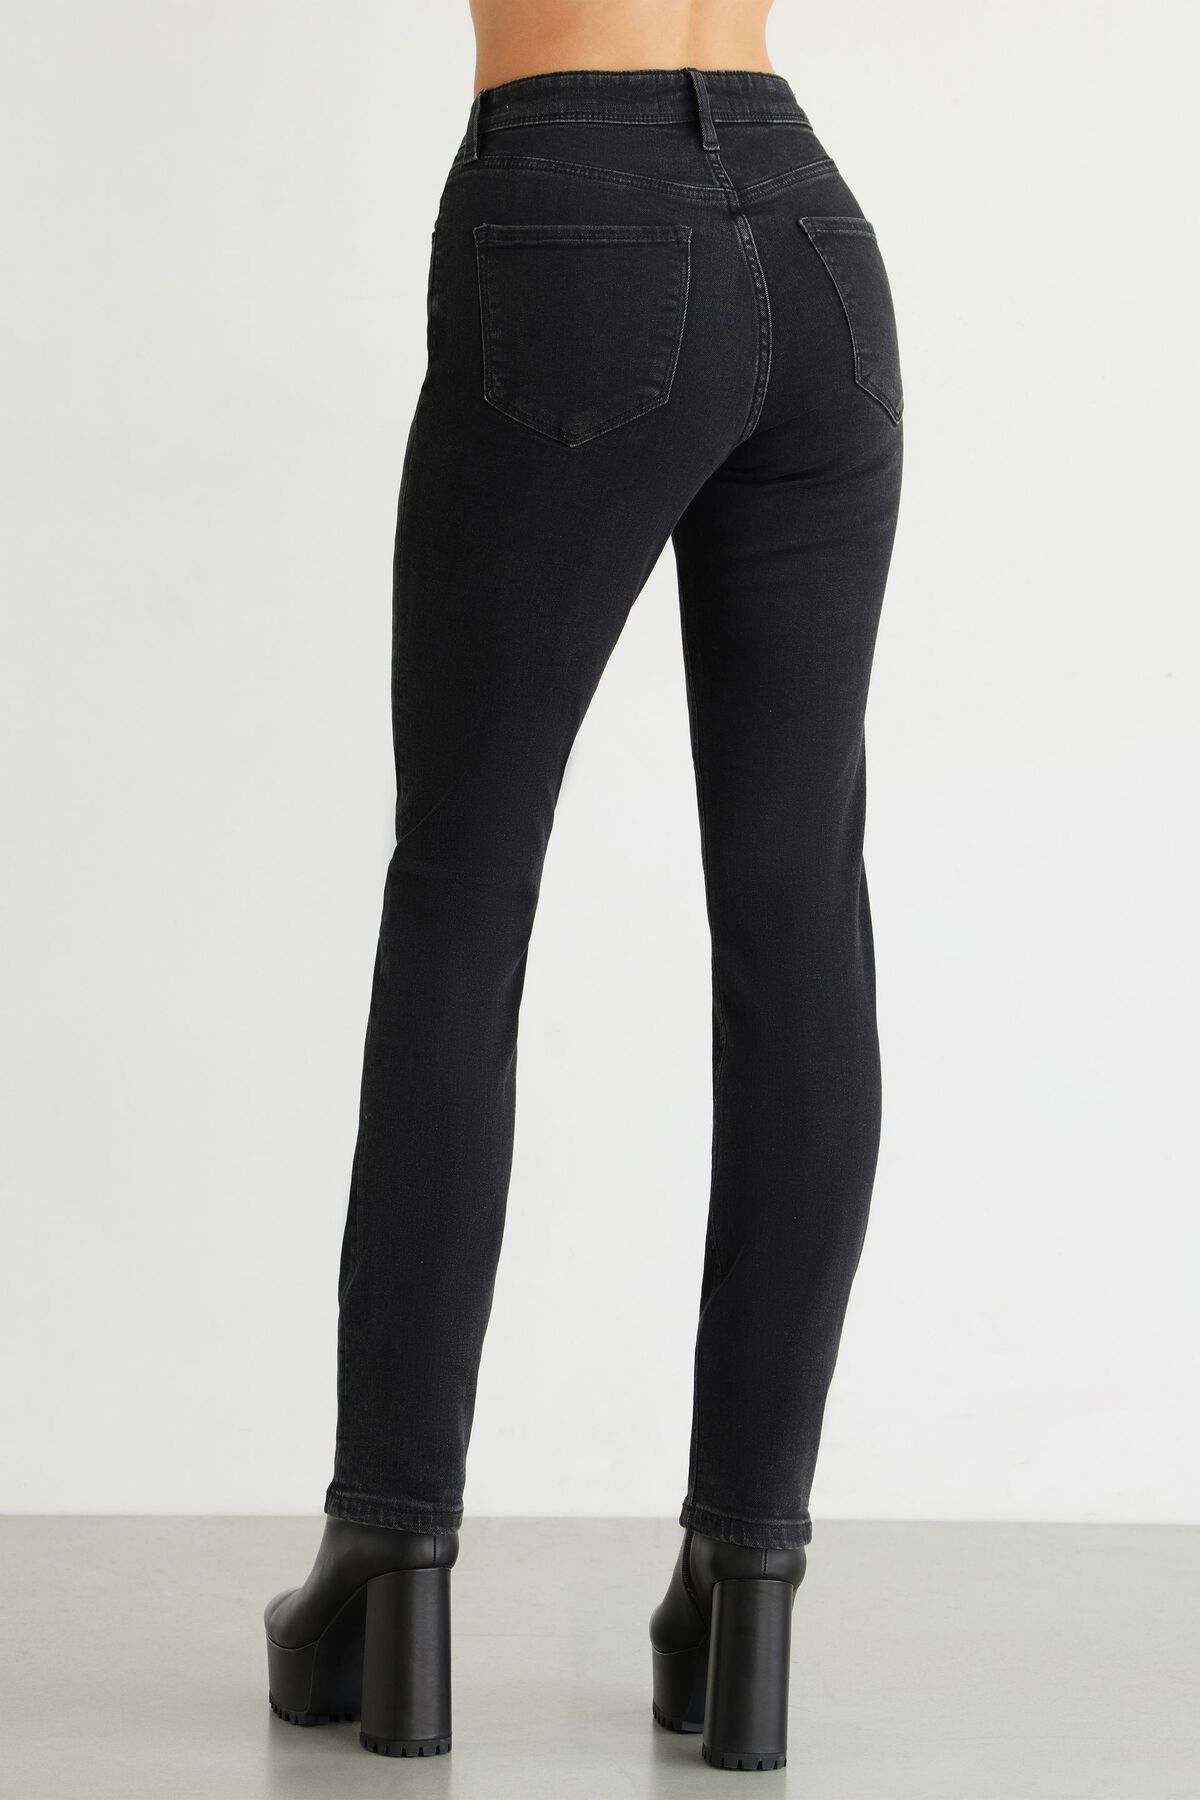 Dynamite Kate High Waist Button Front Jeans. 5